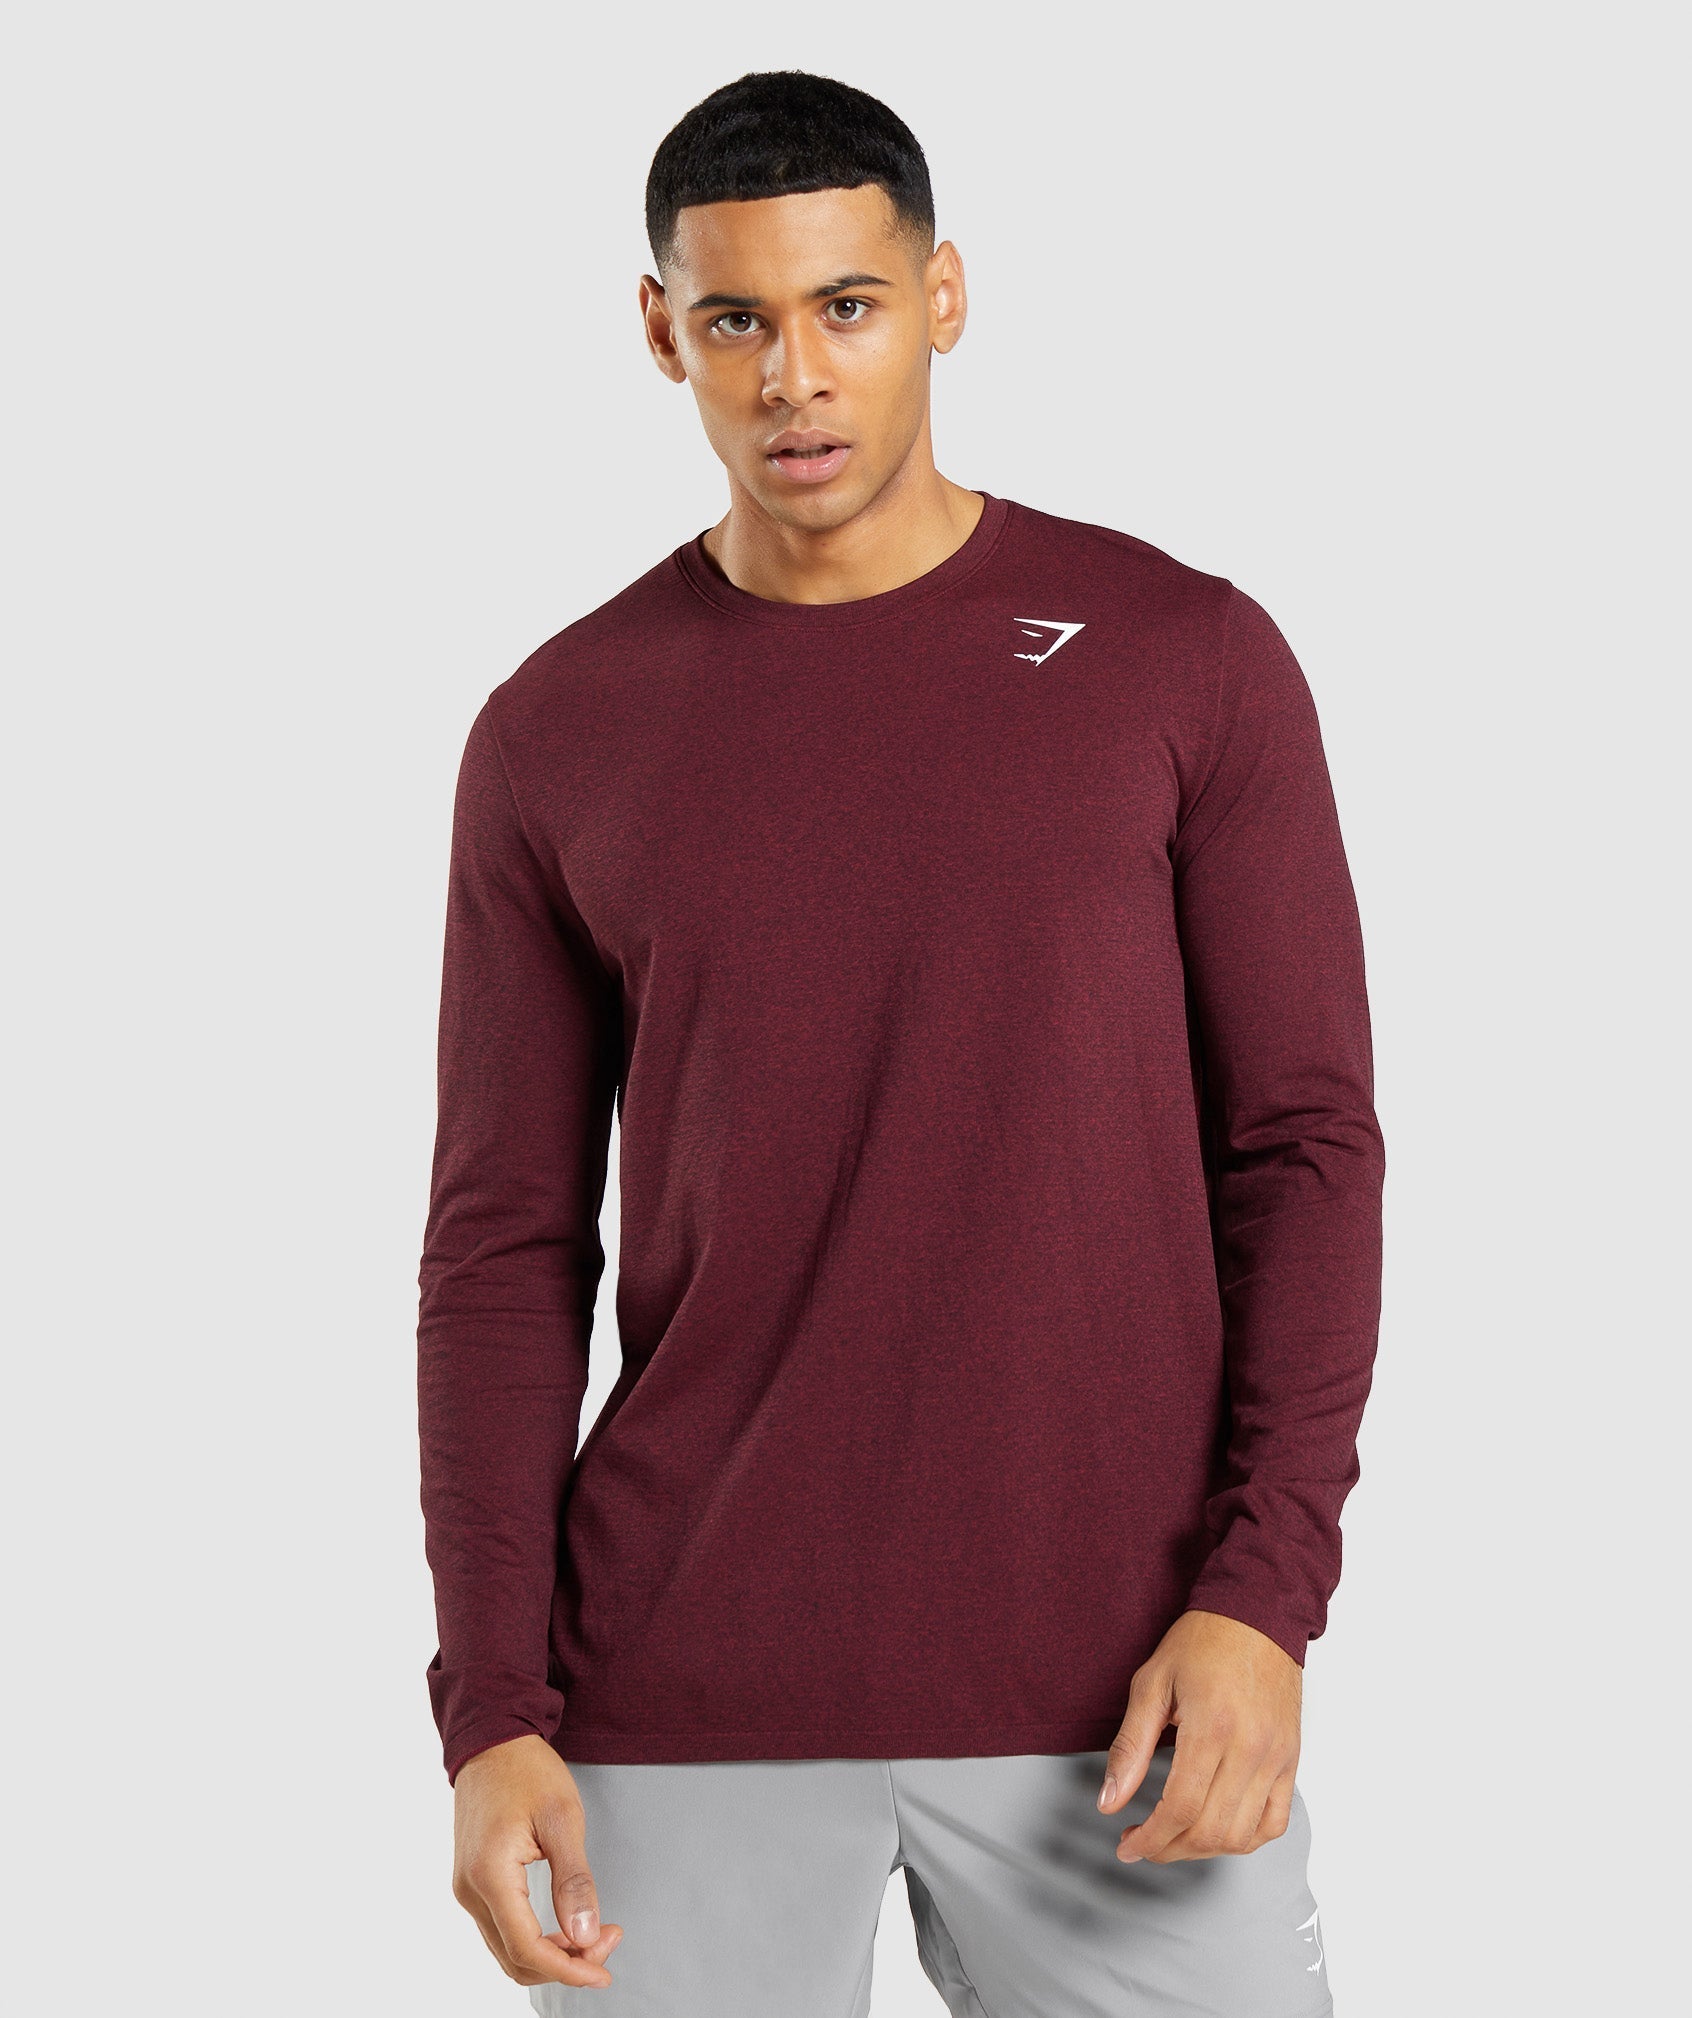 Arrival Seamless Long Sleeve T-Shirt in Burgundy Red Marl - view 1